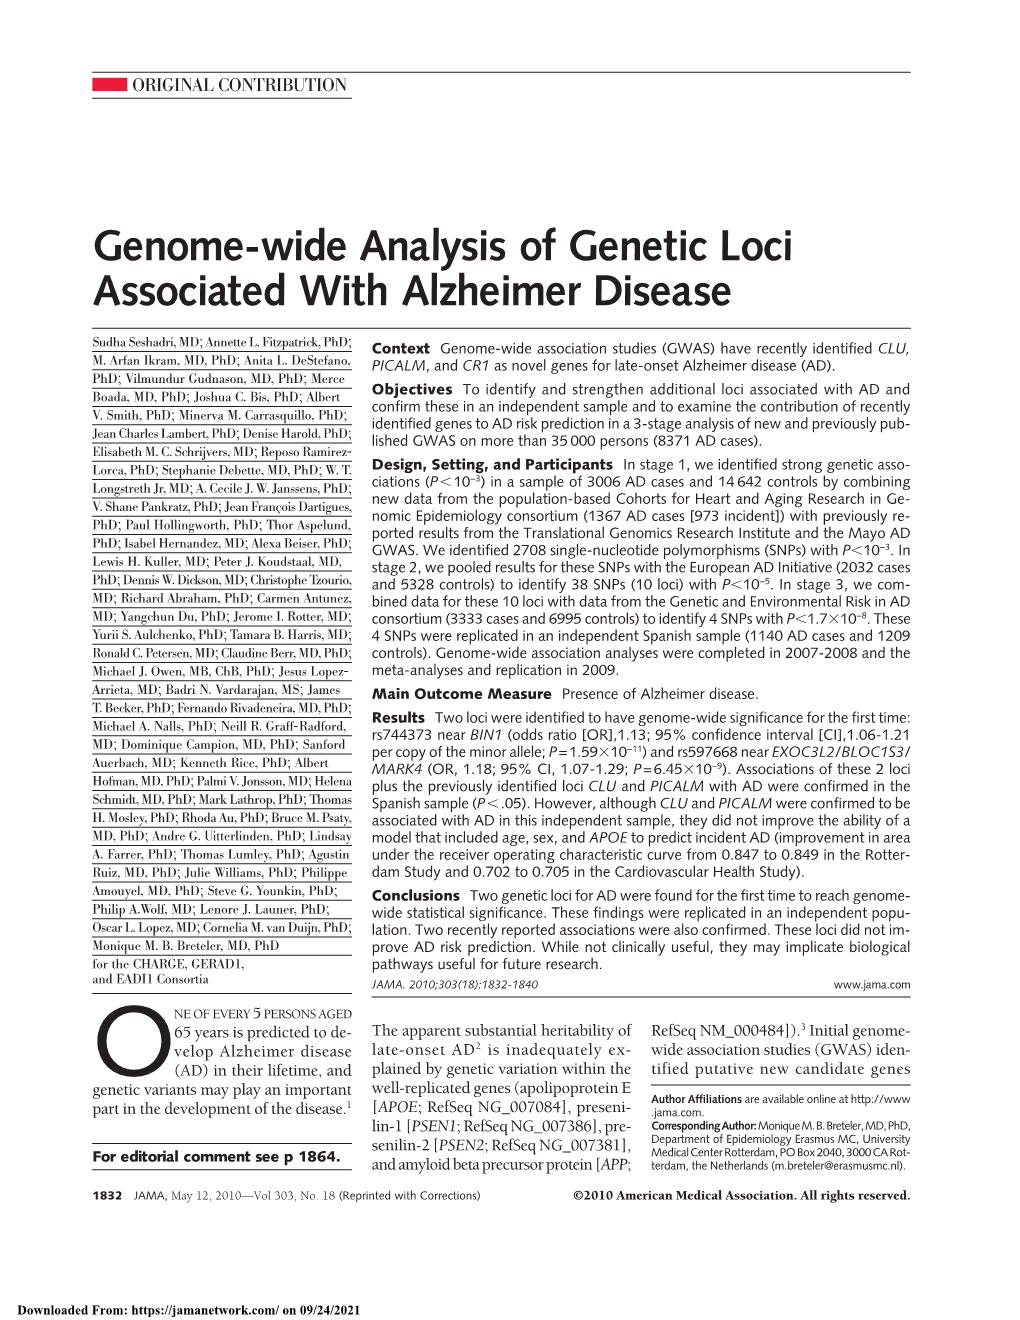 Genome-Wide Analysis of Genetic Loci Associated with Alzheimer Disease